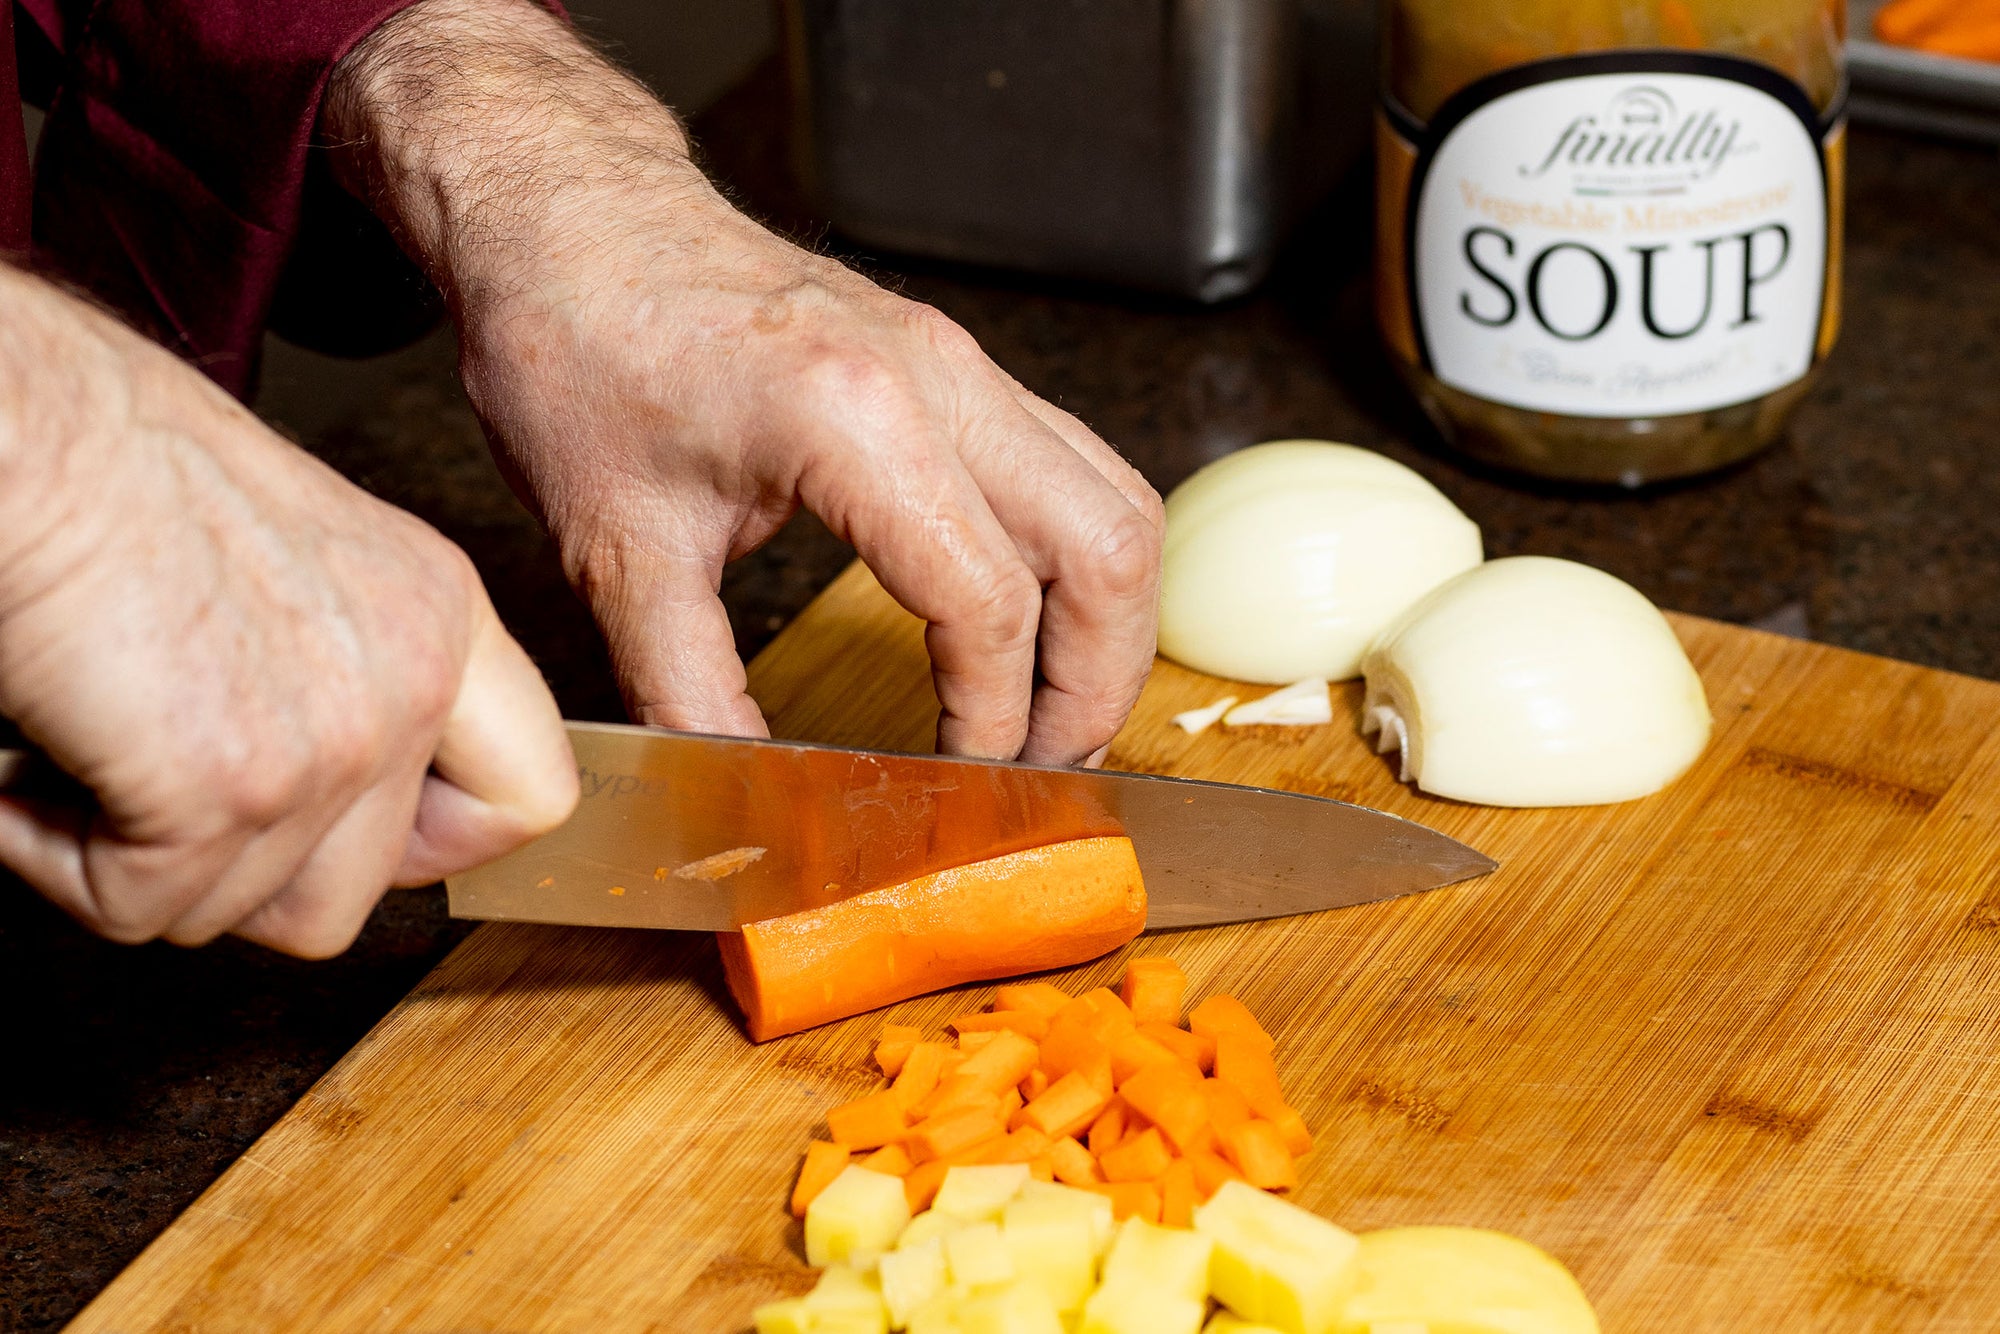 Cutting vegetables on a wooden board to make Vegetable Minestrone Soup